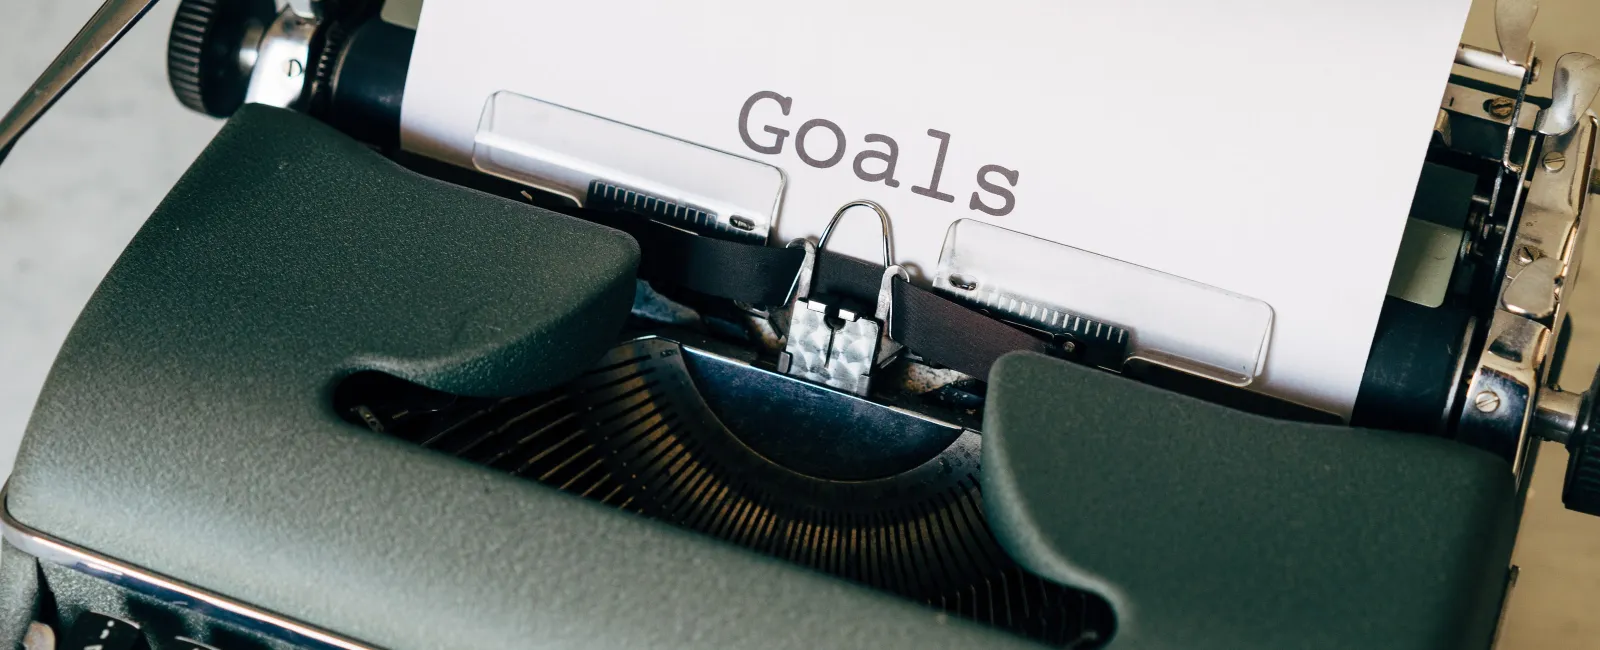 Setting Yourself Up for Success: How to Crush Goals in 2022